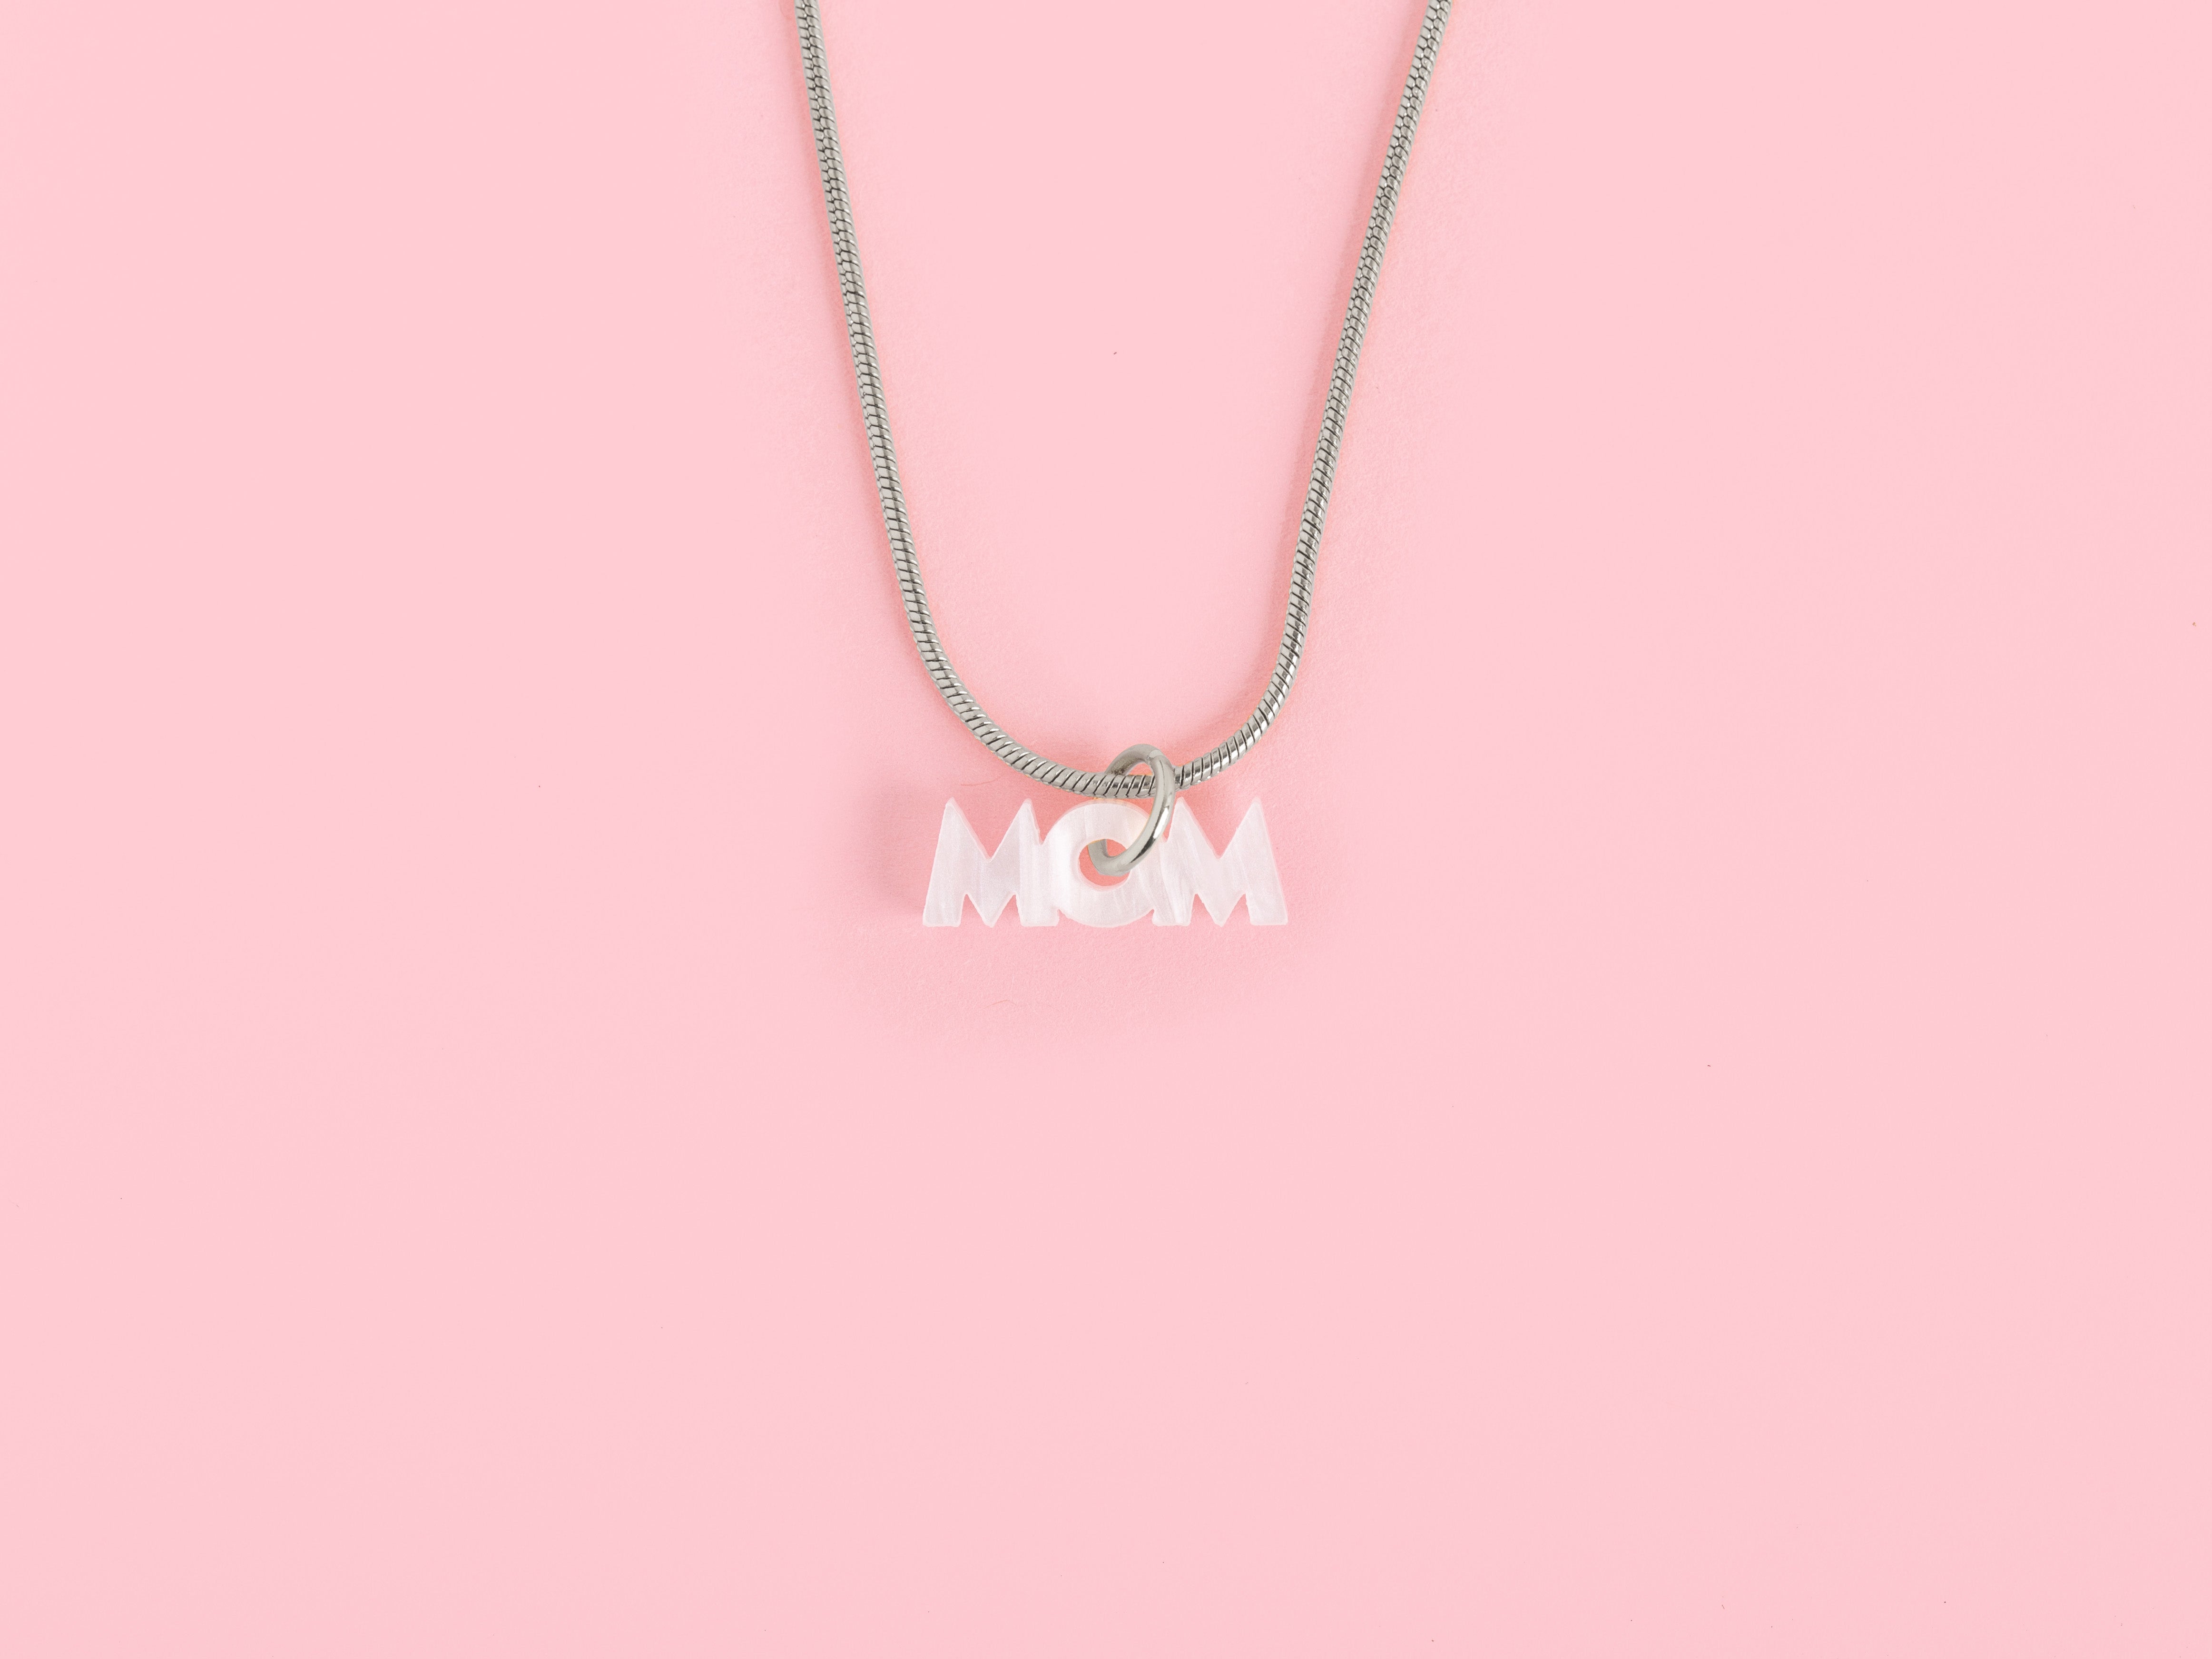 Elegant necklace with mother-of-pearl white mom pendant